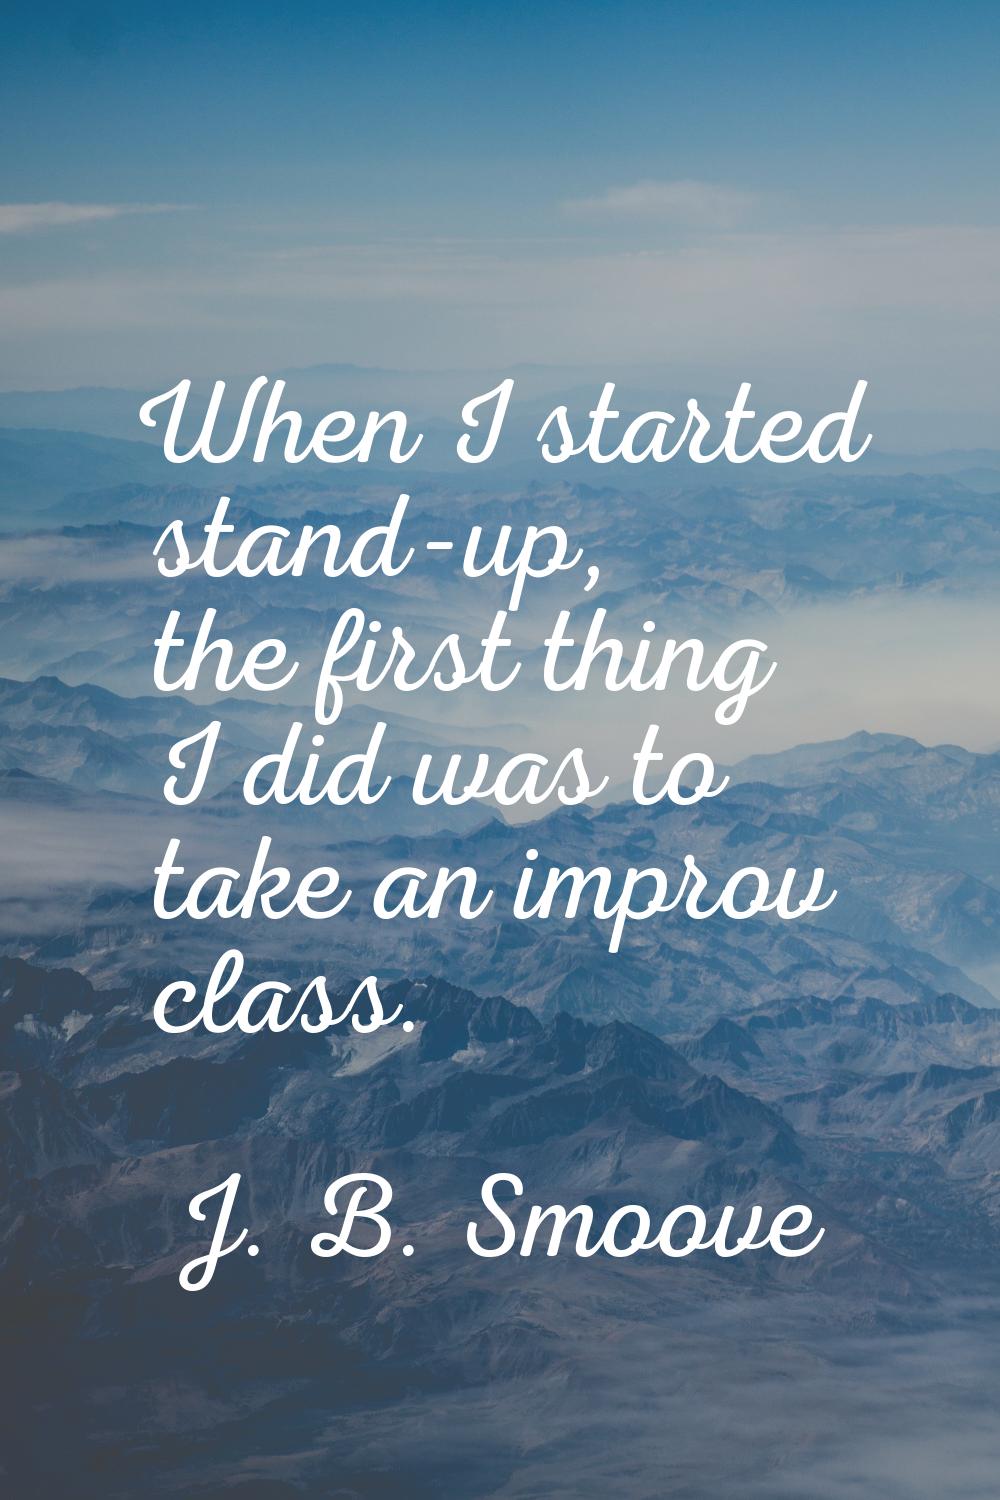 When I started stand-up, the first thing I did was to take an improv class.